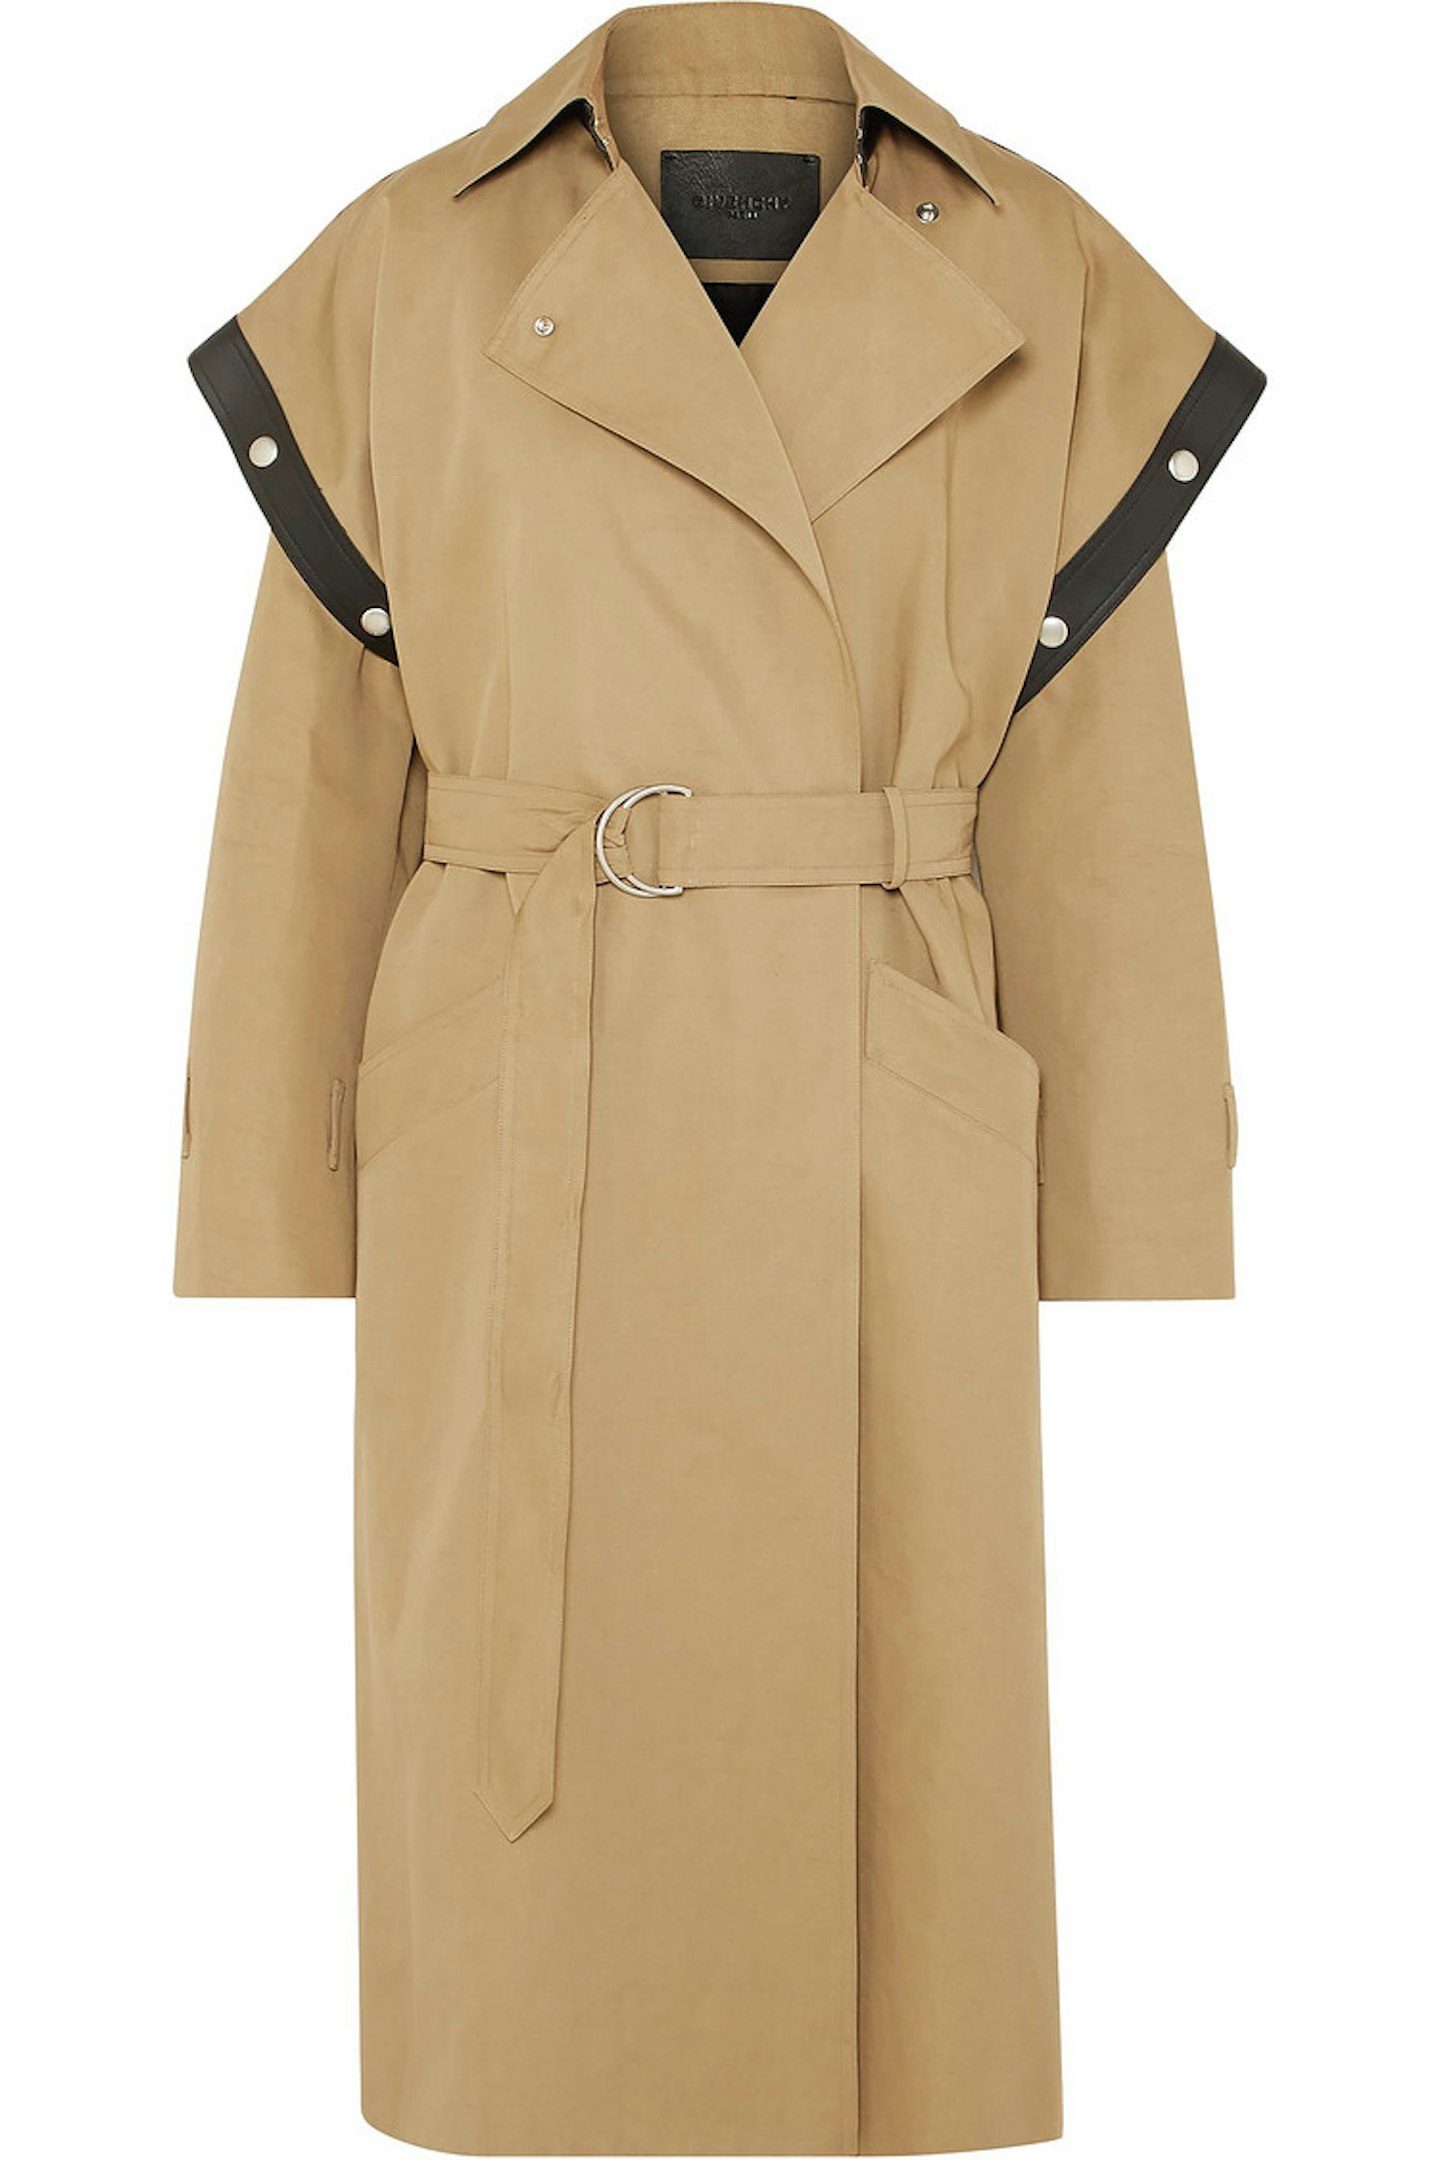 Givenchy, Belted leather-trimmed cotton and linen-blend trench coat,  WAS £3676, NOW £550